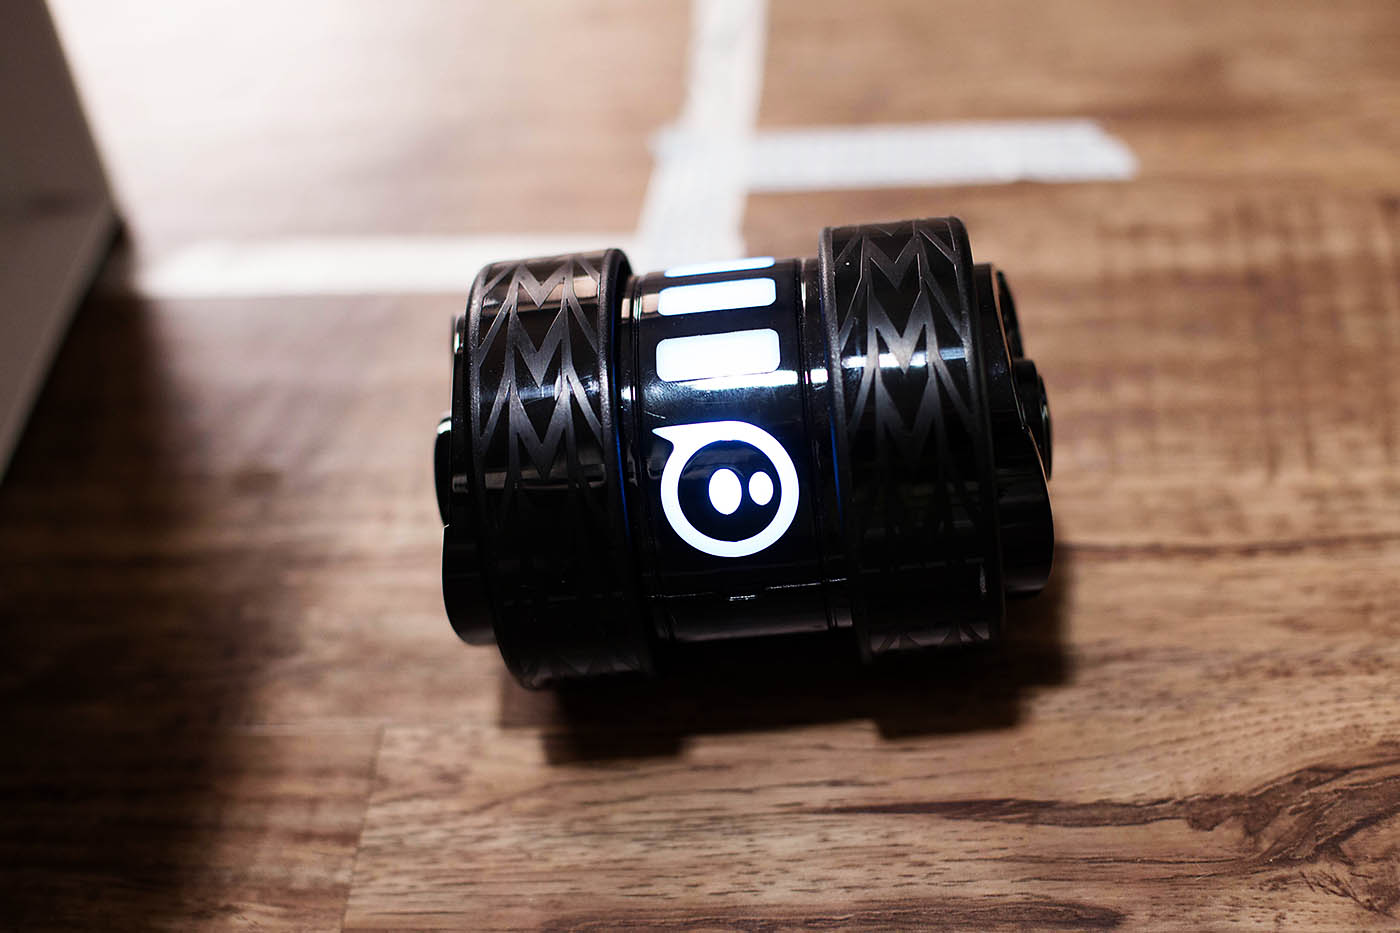 Darkside Ollie - remote control robot that you control with your phone!